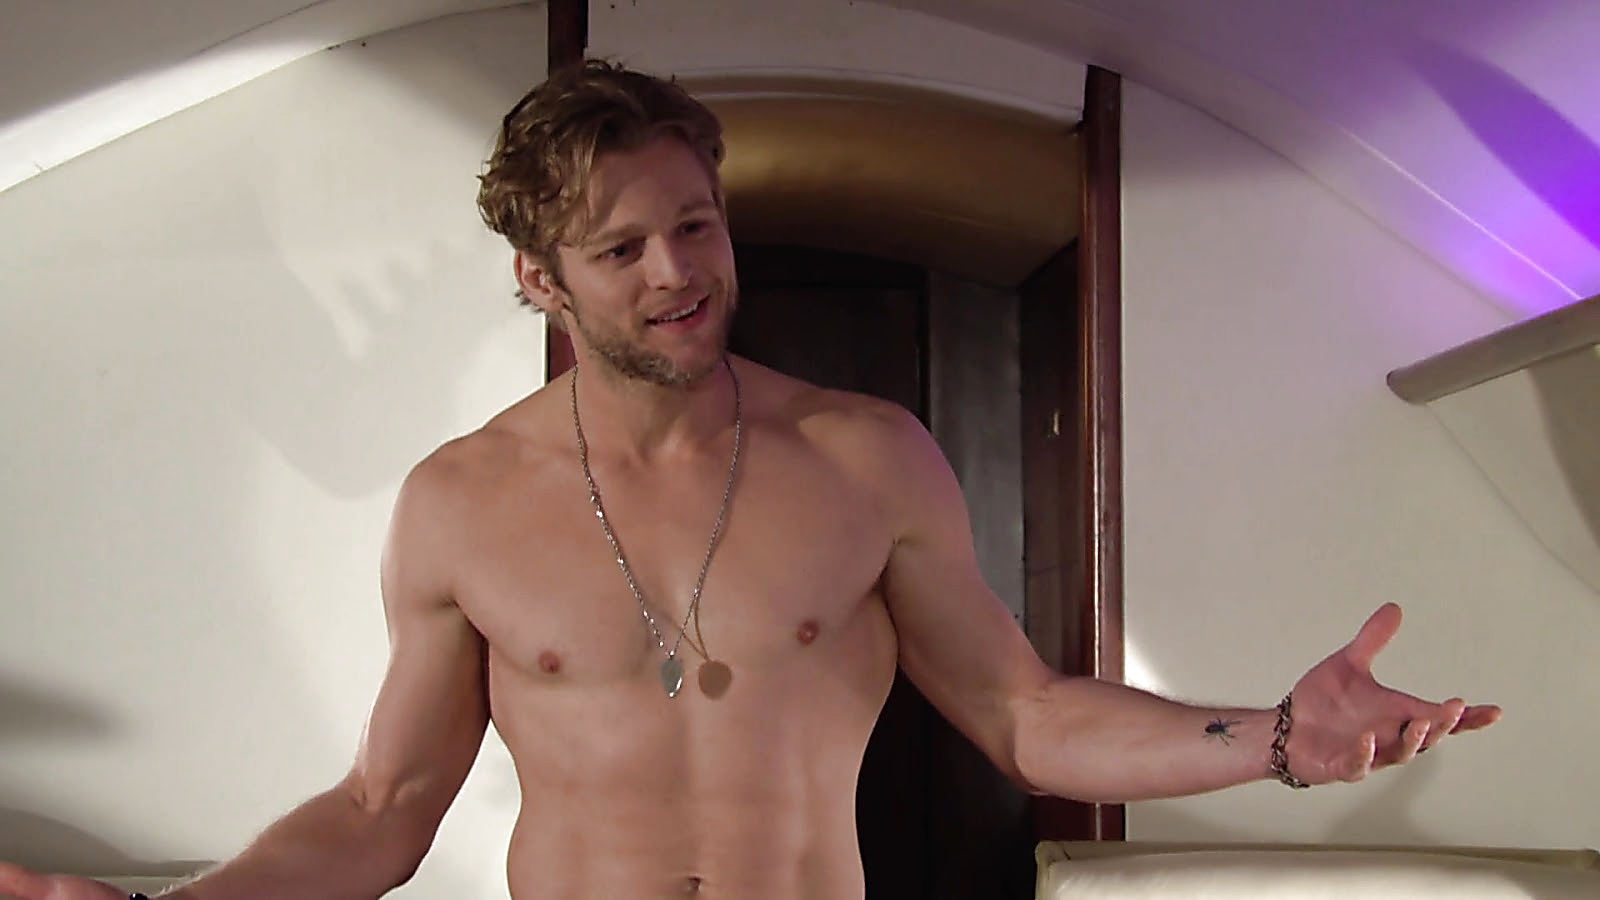 Chase Coleman sexy shirtless scene April 4, 2020, 12pm